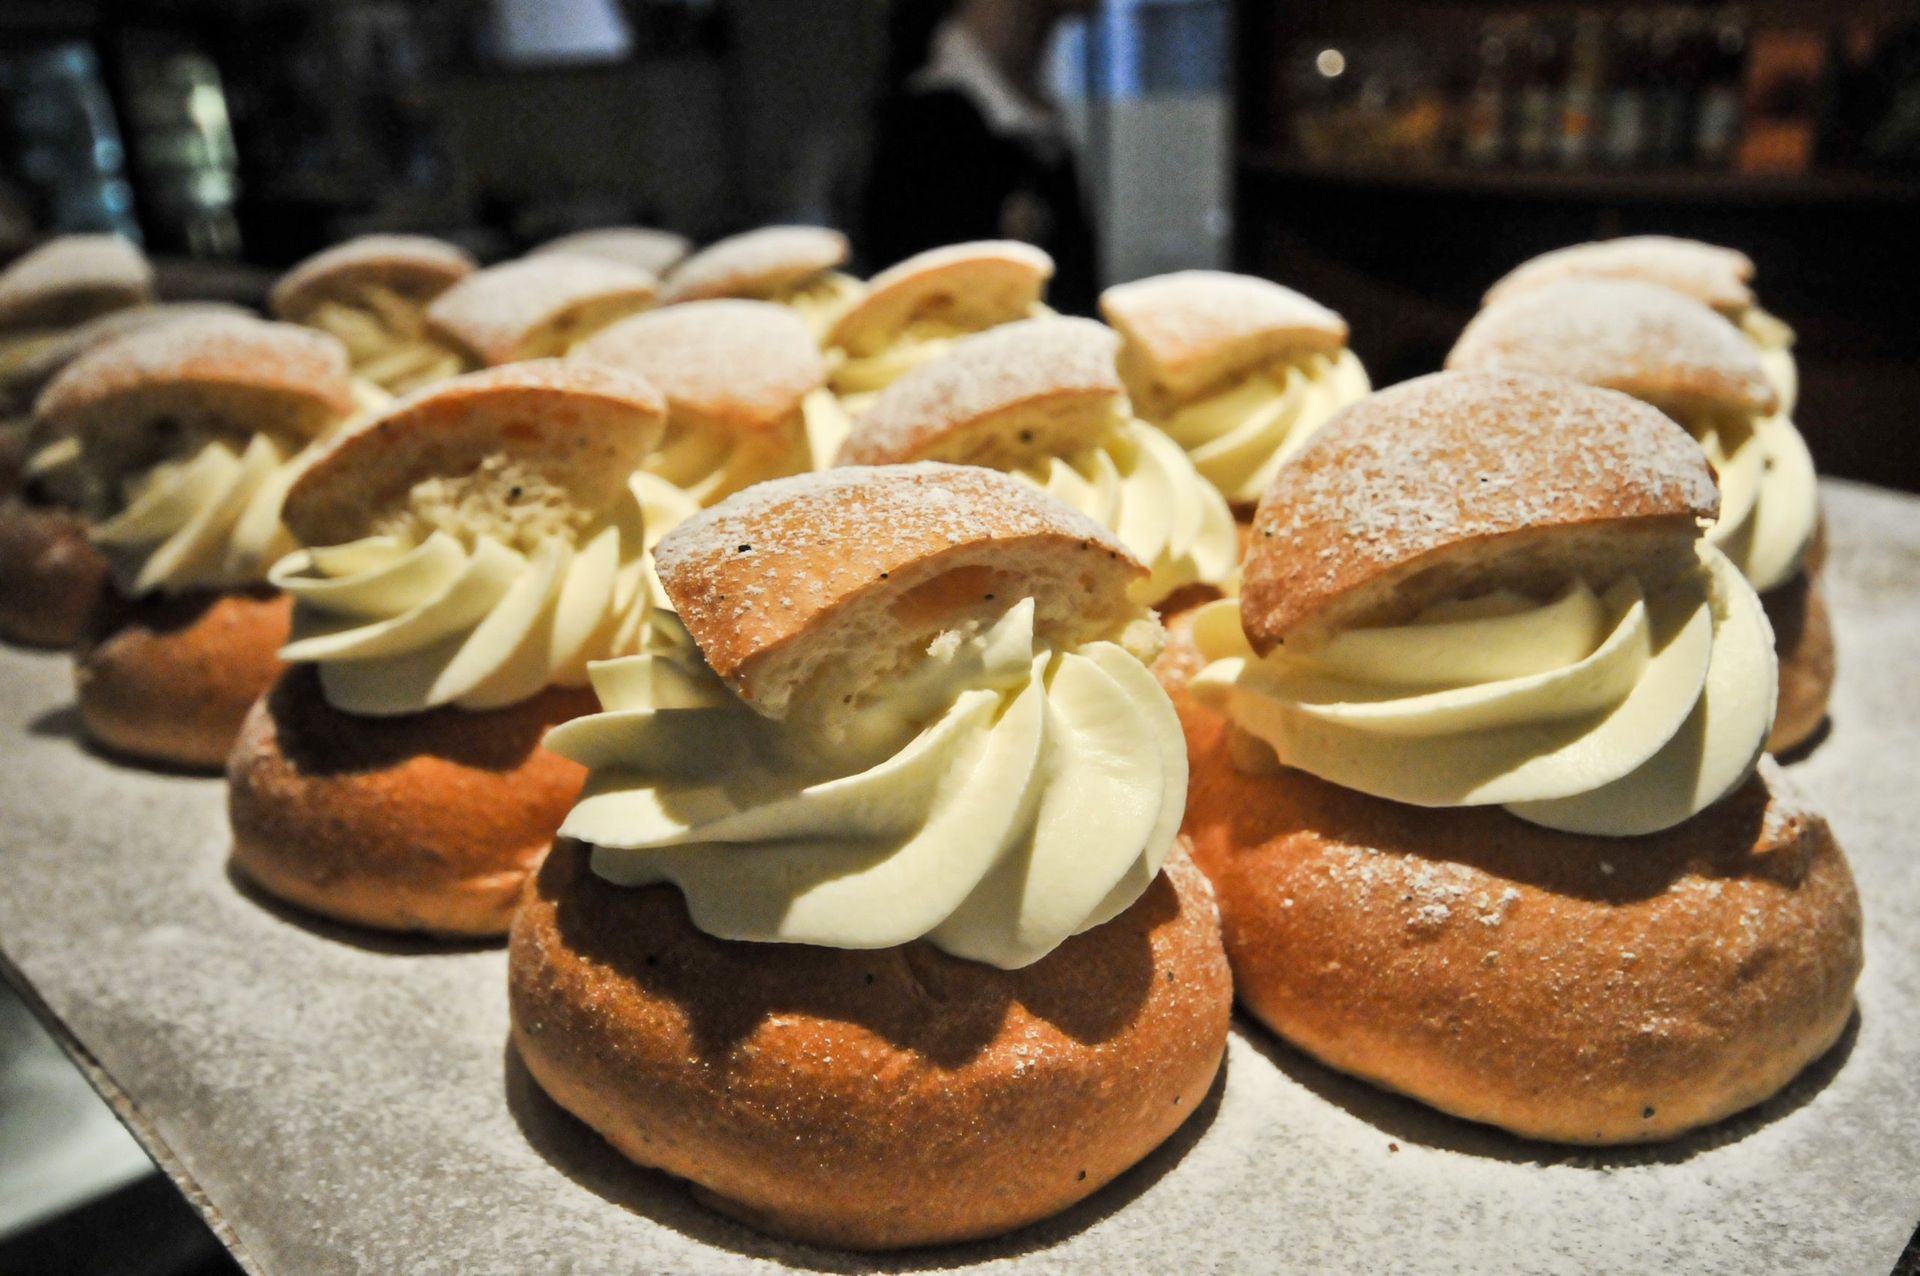 A close up of some cardamon buns (called Semlor in Swedish). A bun with almond paste and whipped cream.